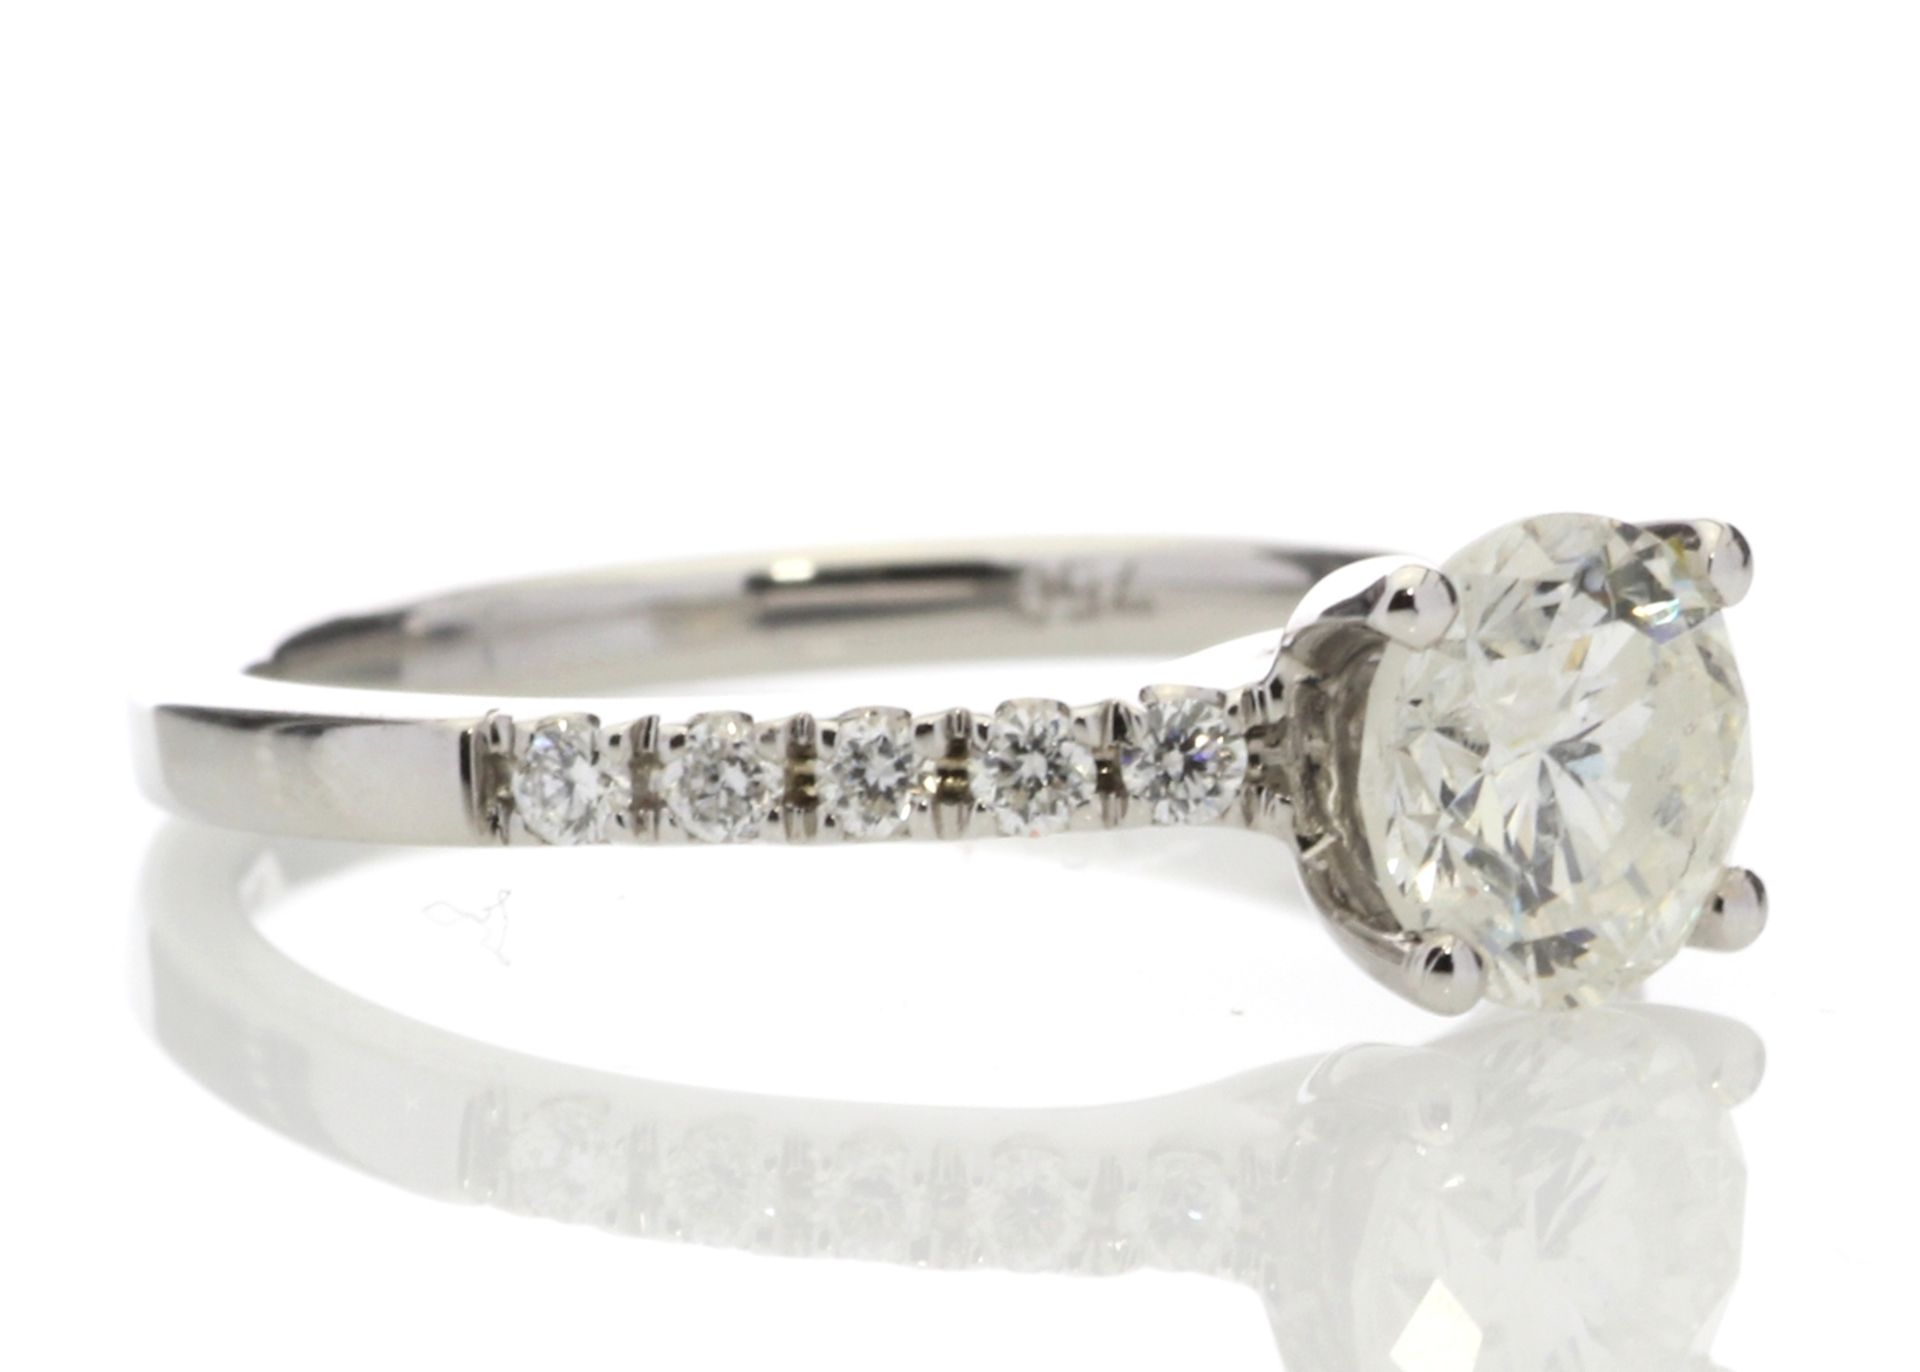 18ct White Gold Single Stone Diamond Ring With Stone Set Shoulders (1.07) 1.25 Carats - Image 4 of 5